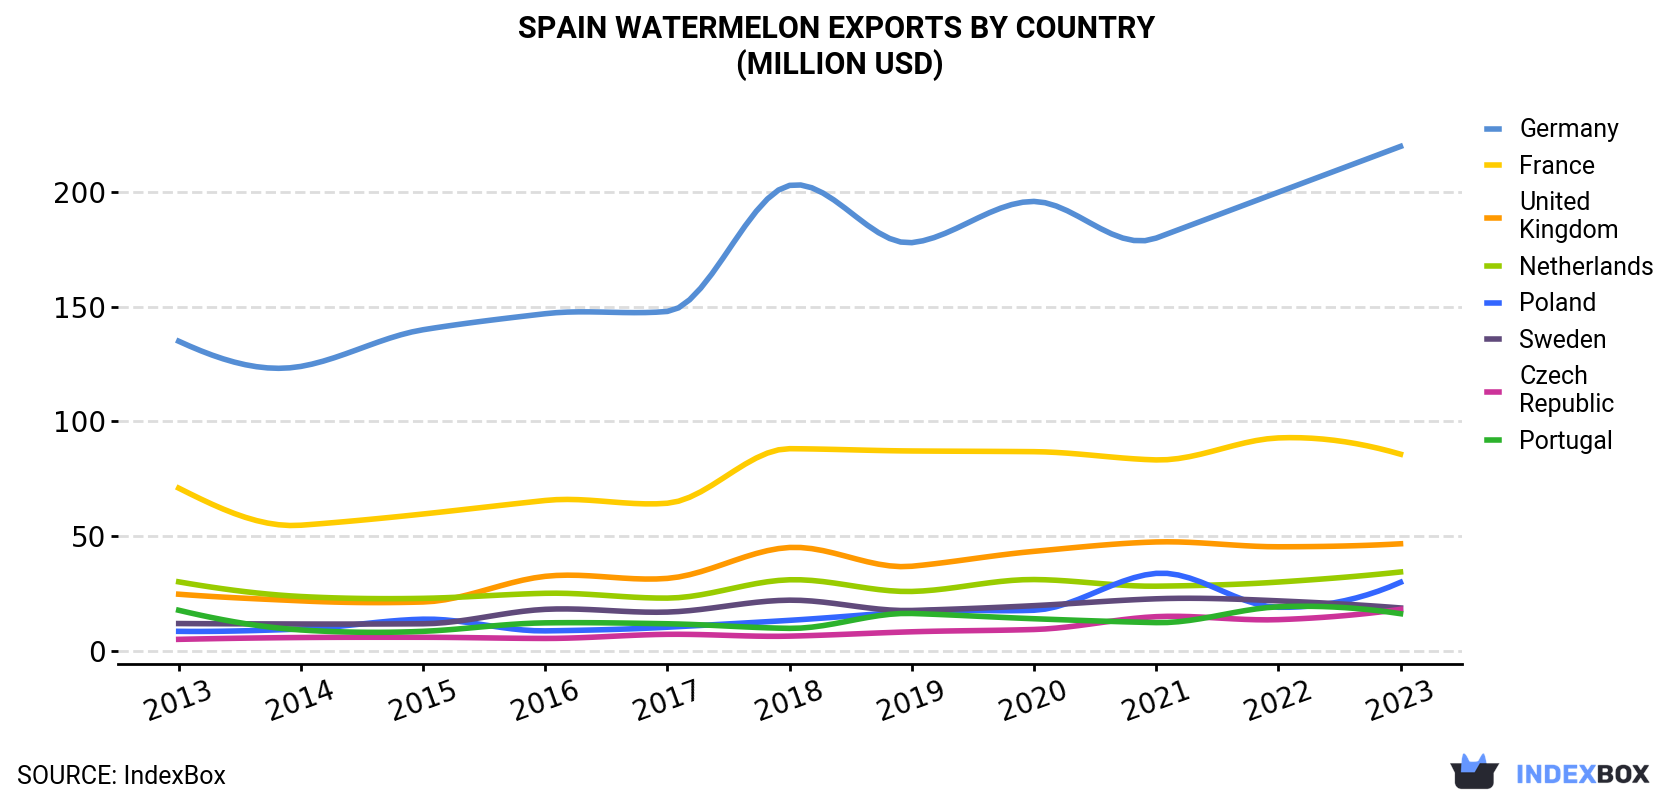 Spain Watermelon Exports By Country (Million USD)